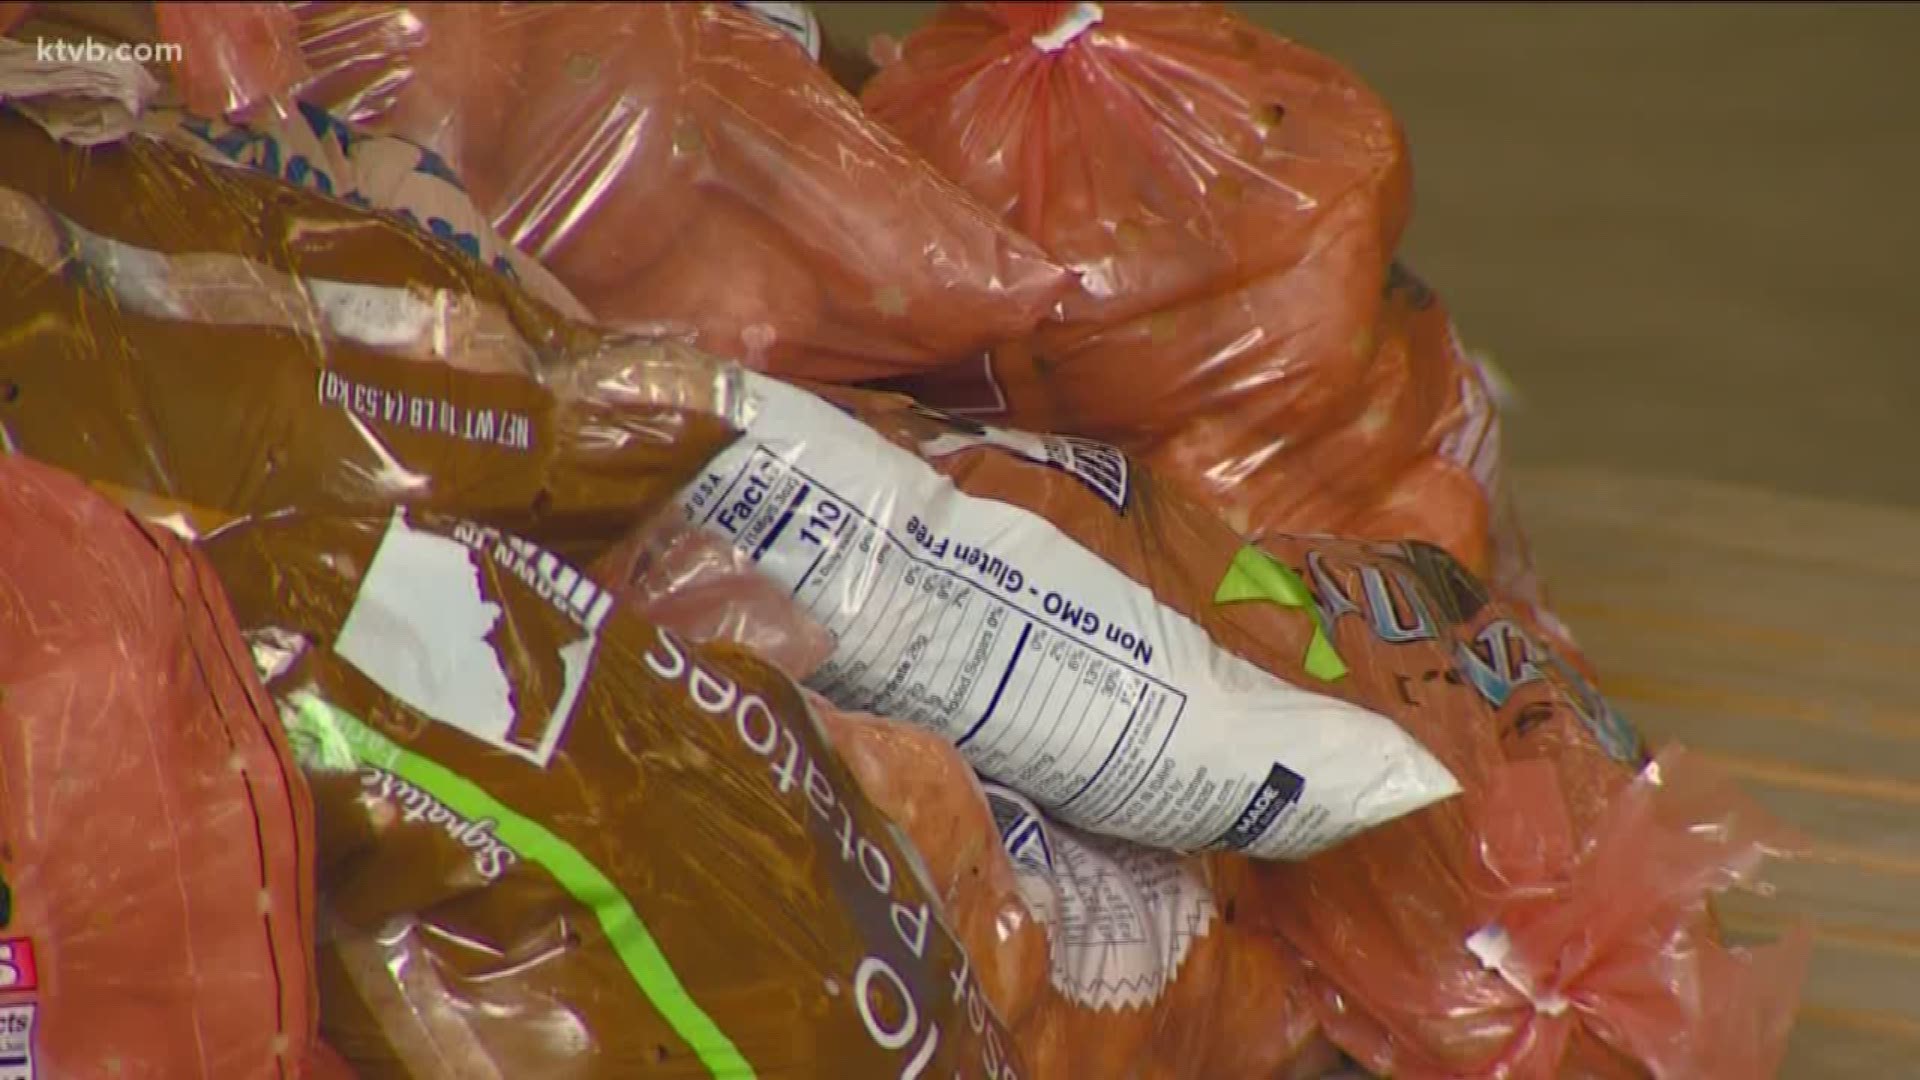 St. Vincent de Paul is filling a tremendous need in the Treasure Valley by providing thousands of Thanksgiving meals for people who need them most.